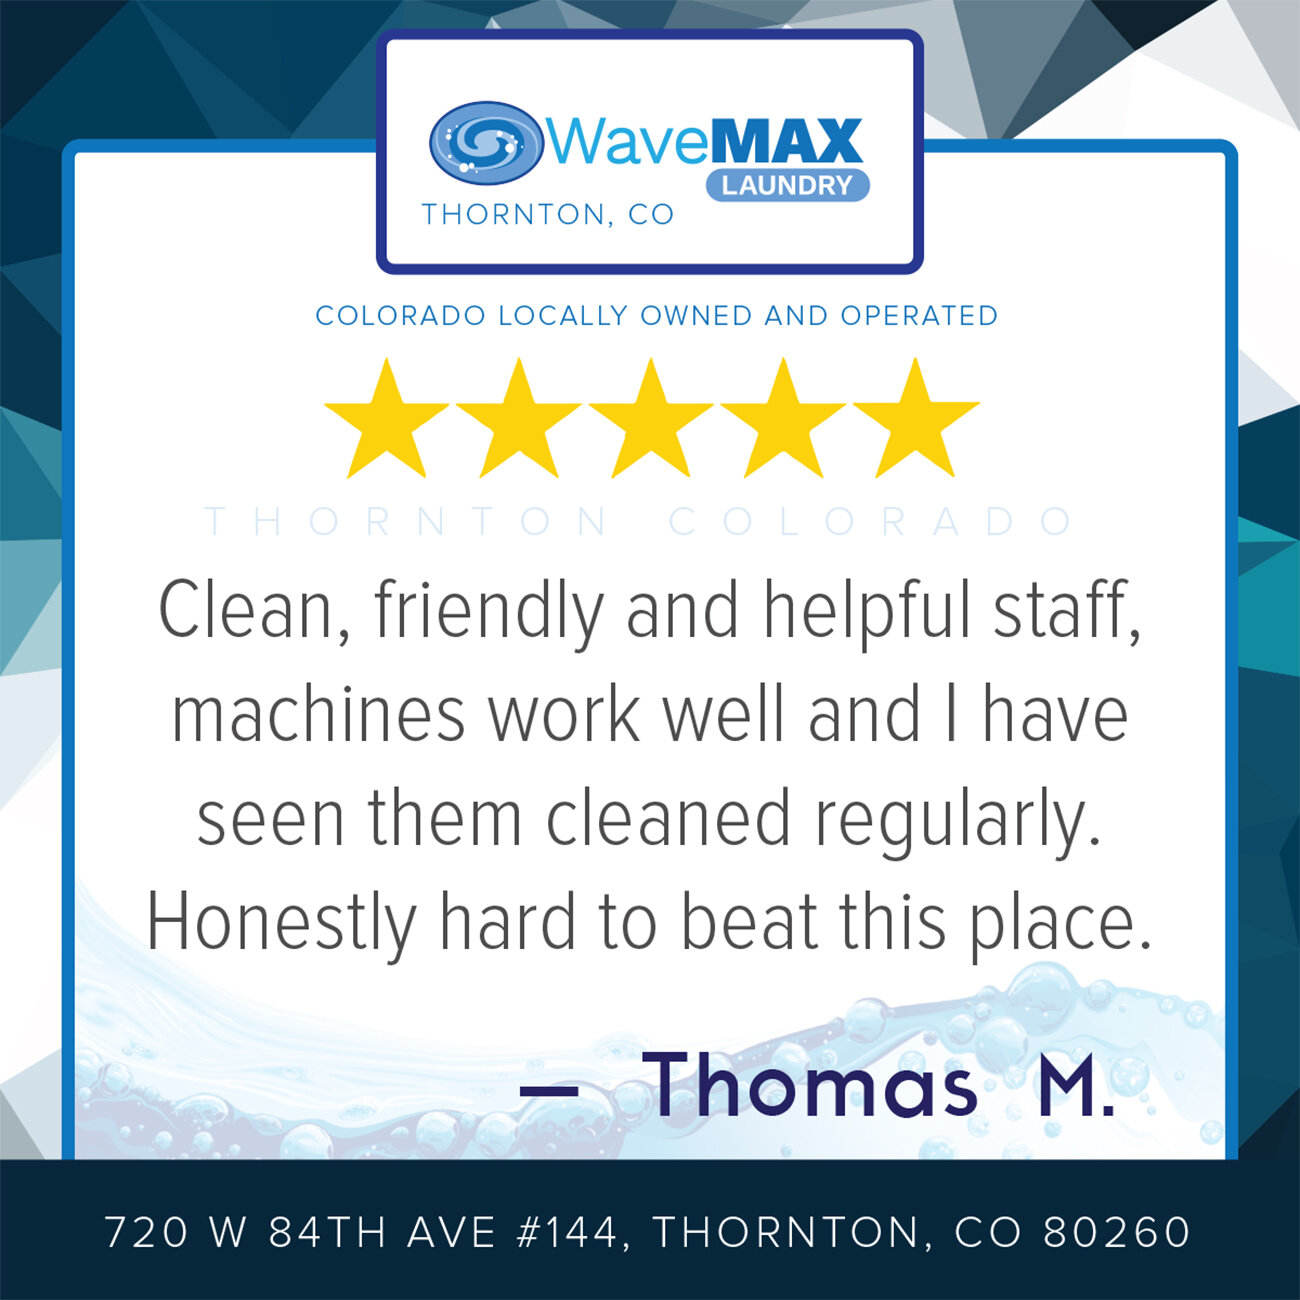 Thank you! As owners, we really try and make your time at WaveMAX enjoyable. Have you had a great experience at WaveMAX Thornton? Please leave us a review or read what others have to say about WaveMAX Thornton &gt;&gt;http://bit.ly/WaveMAXThornton